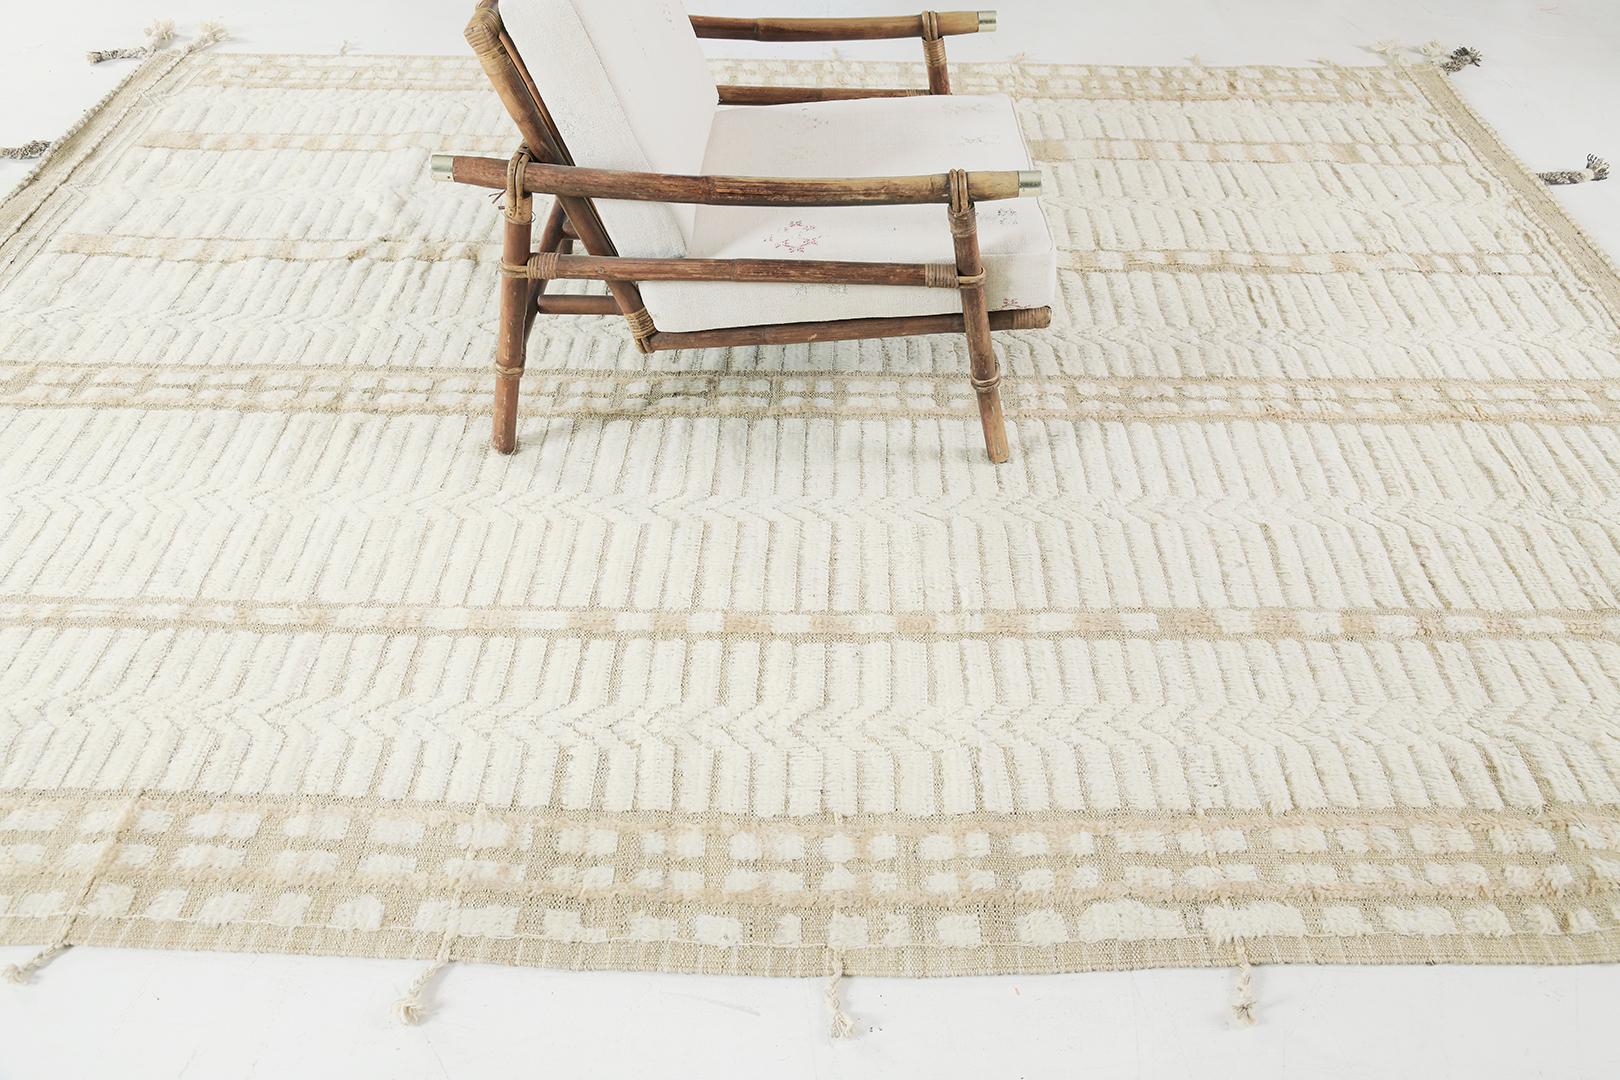 Tala’ displays a series of linear formation cohesively blending together forming a distinct character of the entirety of this magnificent rug. Rendered in chocolate beige and ivory, the texture of this mesmerizing rug brings out the warm and cozy